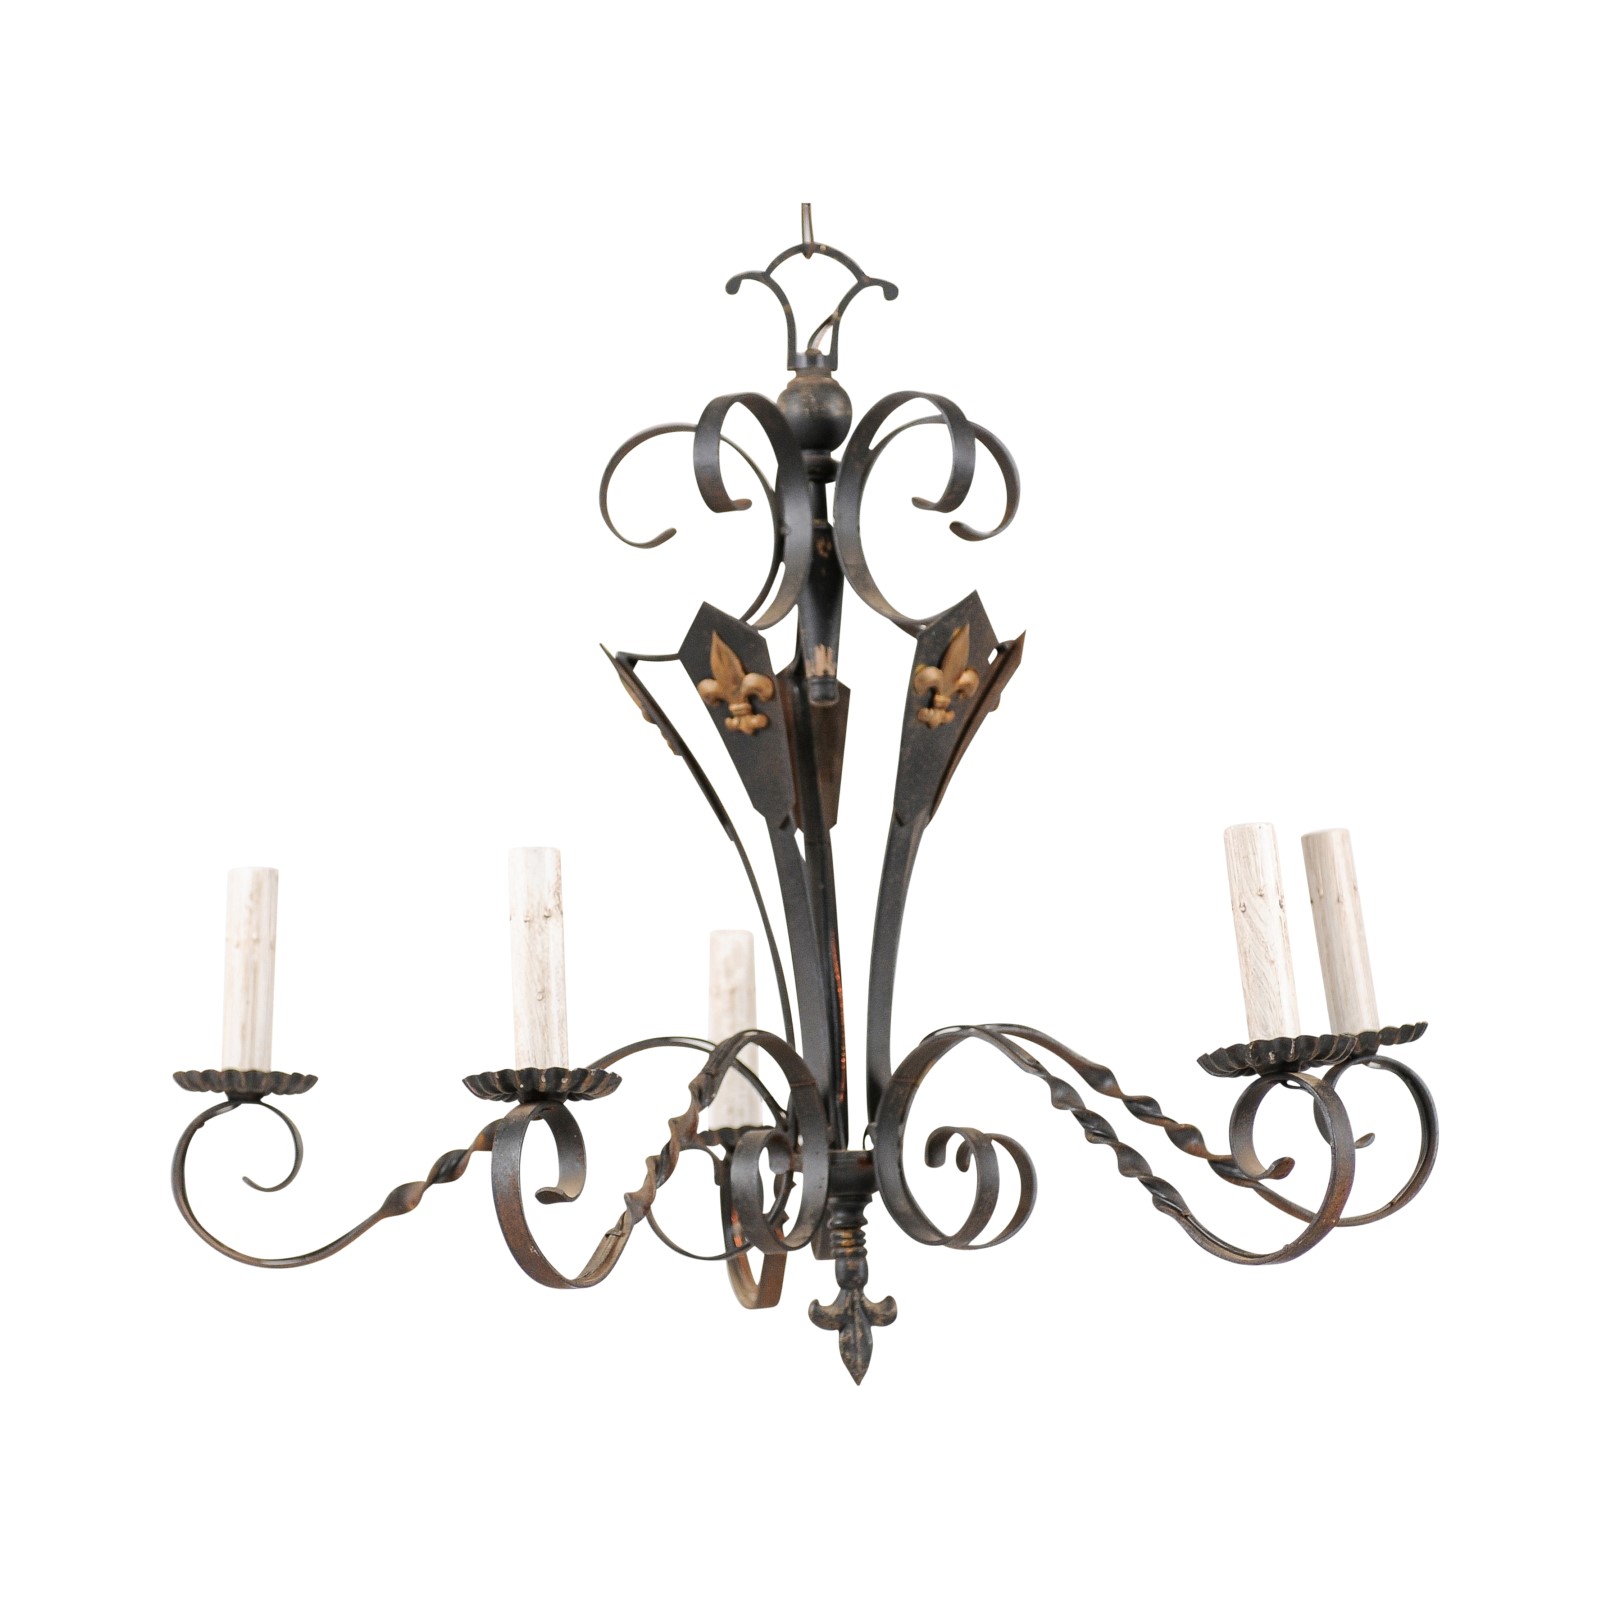 Vintage French 5-Light Iron Chandelier